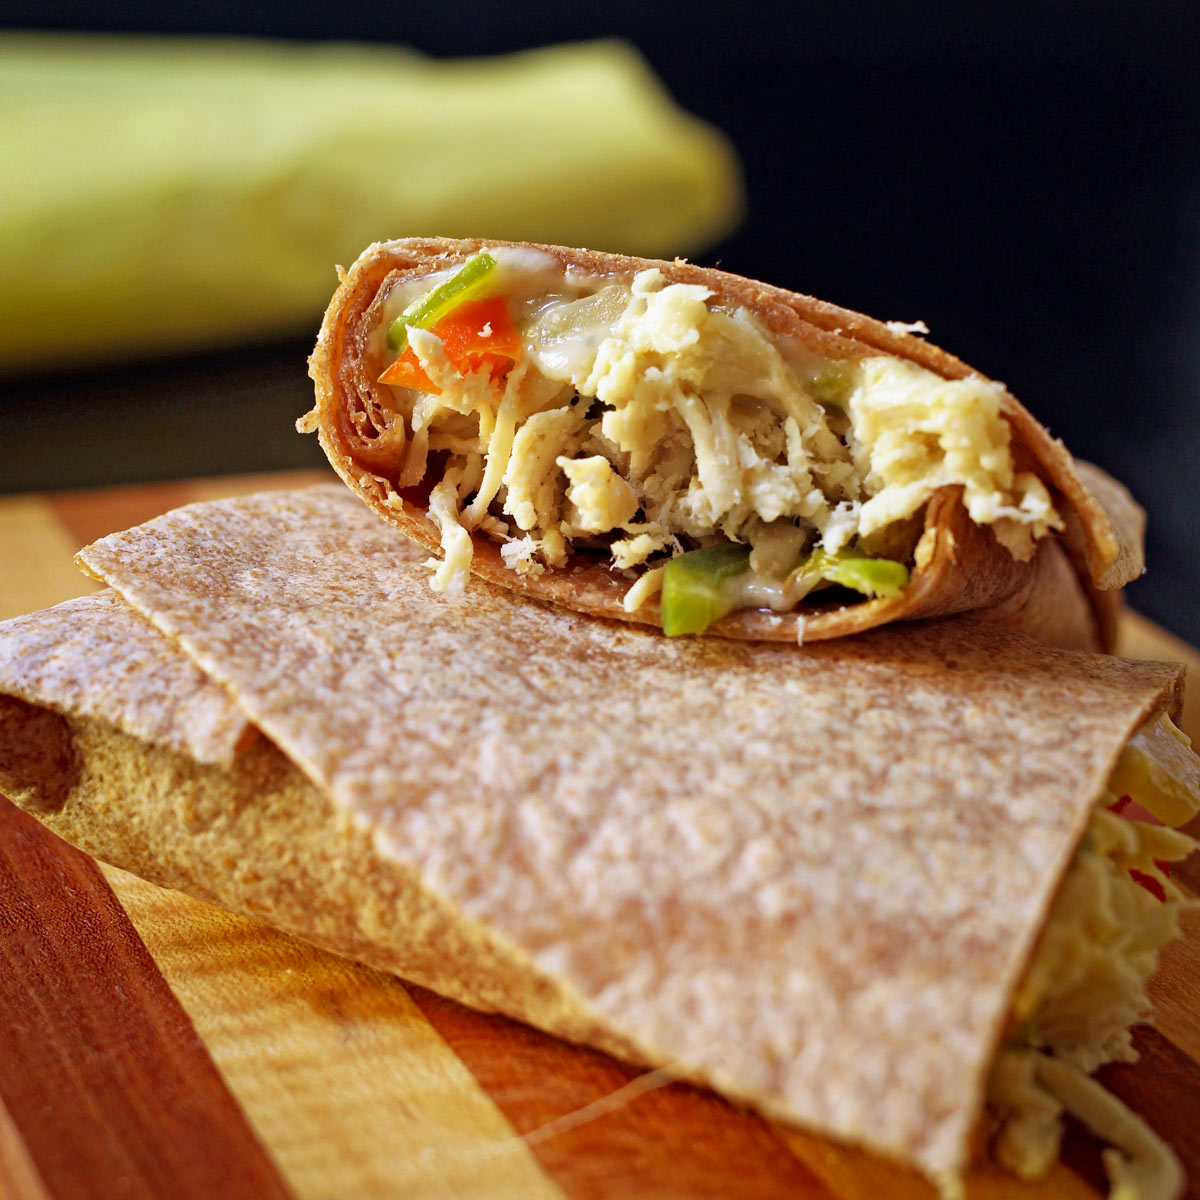 chicken fajita burrito cut in half with one half resting on the other, showing the cut side.